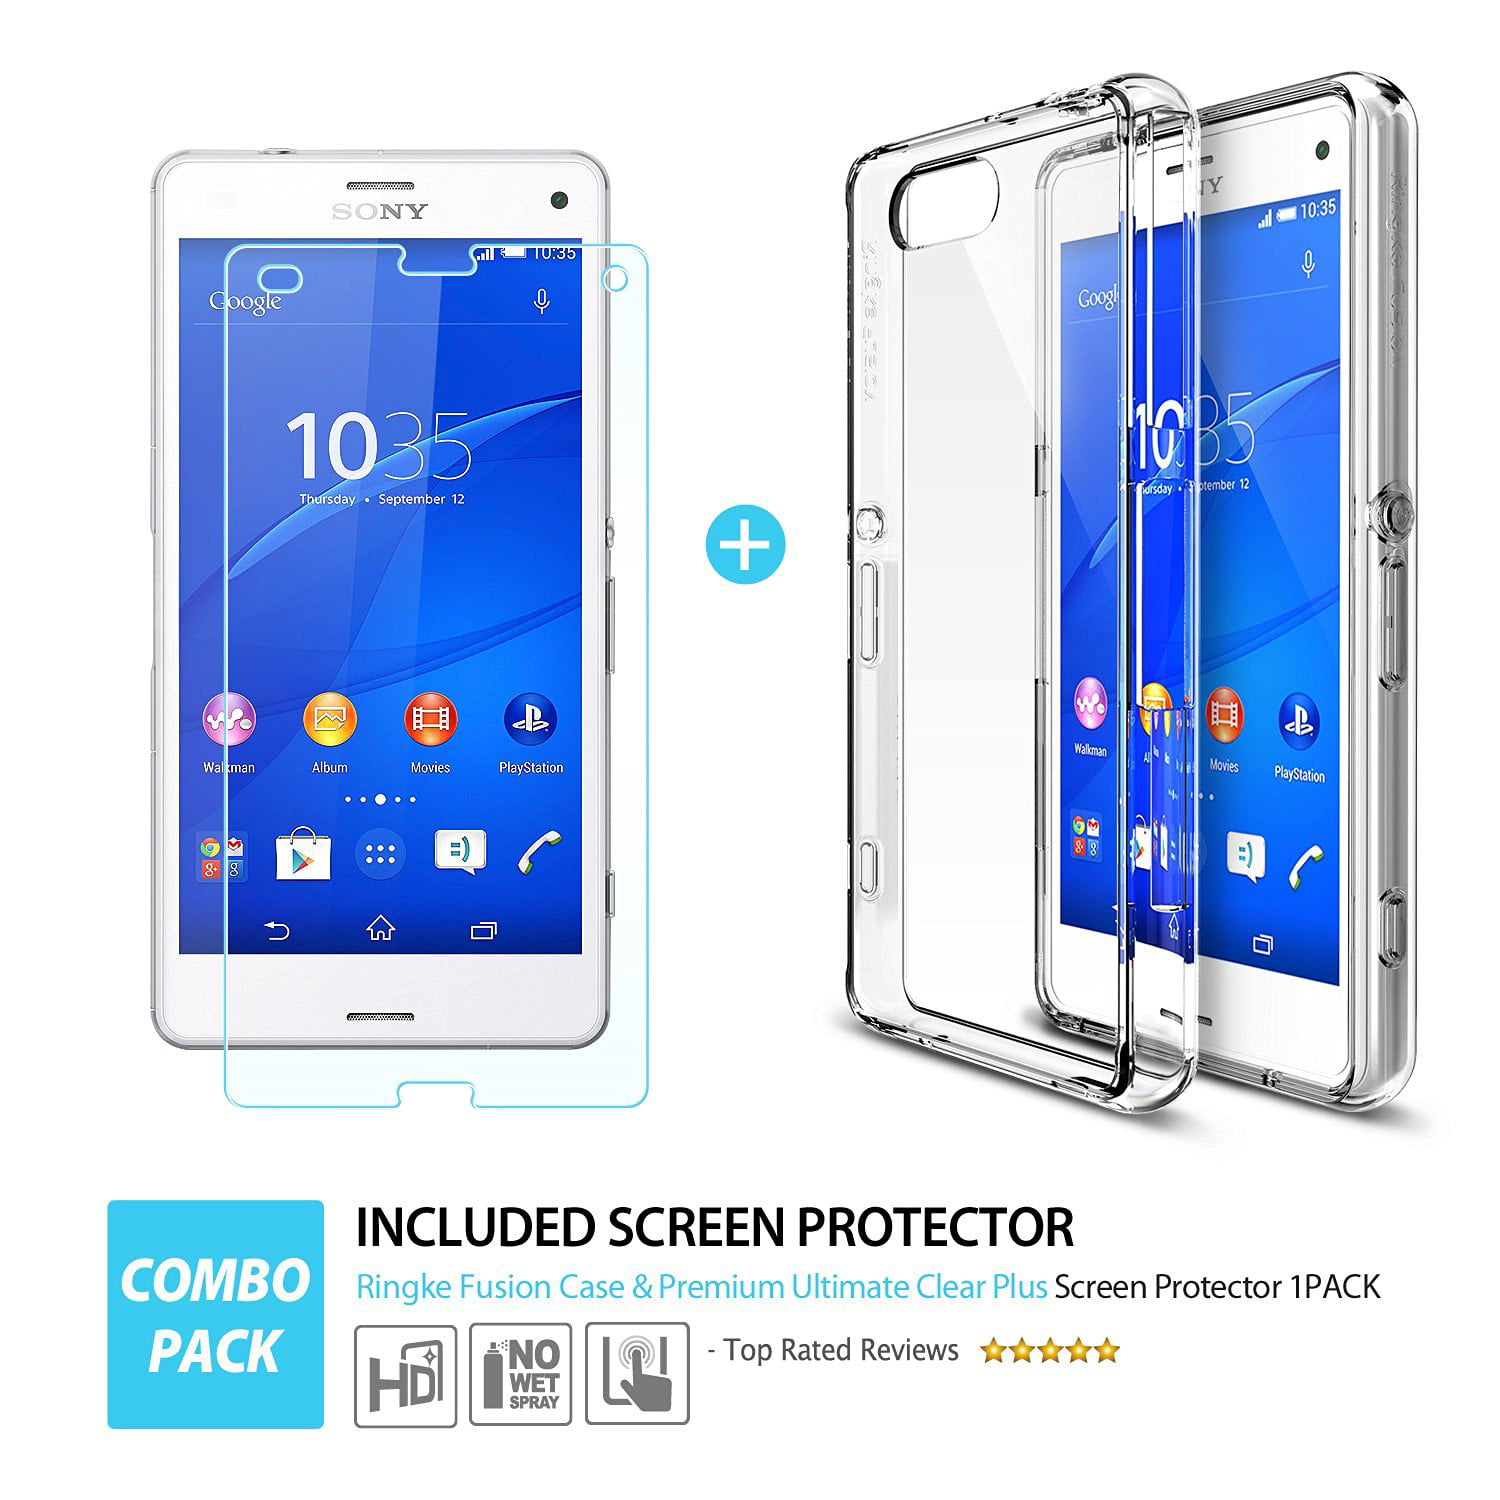 Trouwens Belastingbetaler Herhaal Ringke Fusion Case Compatible with Sony Xperia Z3 Compact, Transparent PC  Back TPU Bumper Drop Protection Phone Cover - Clear - Walmart.com